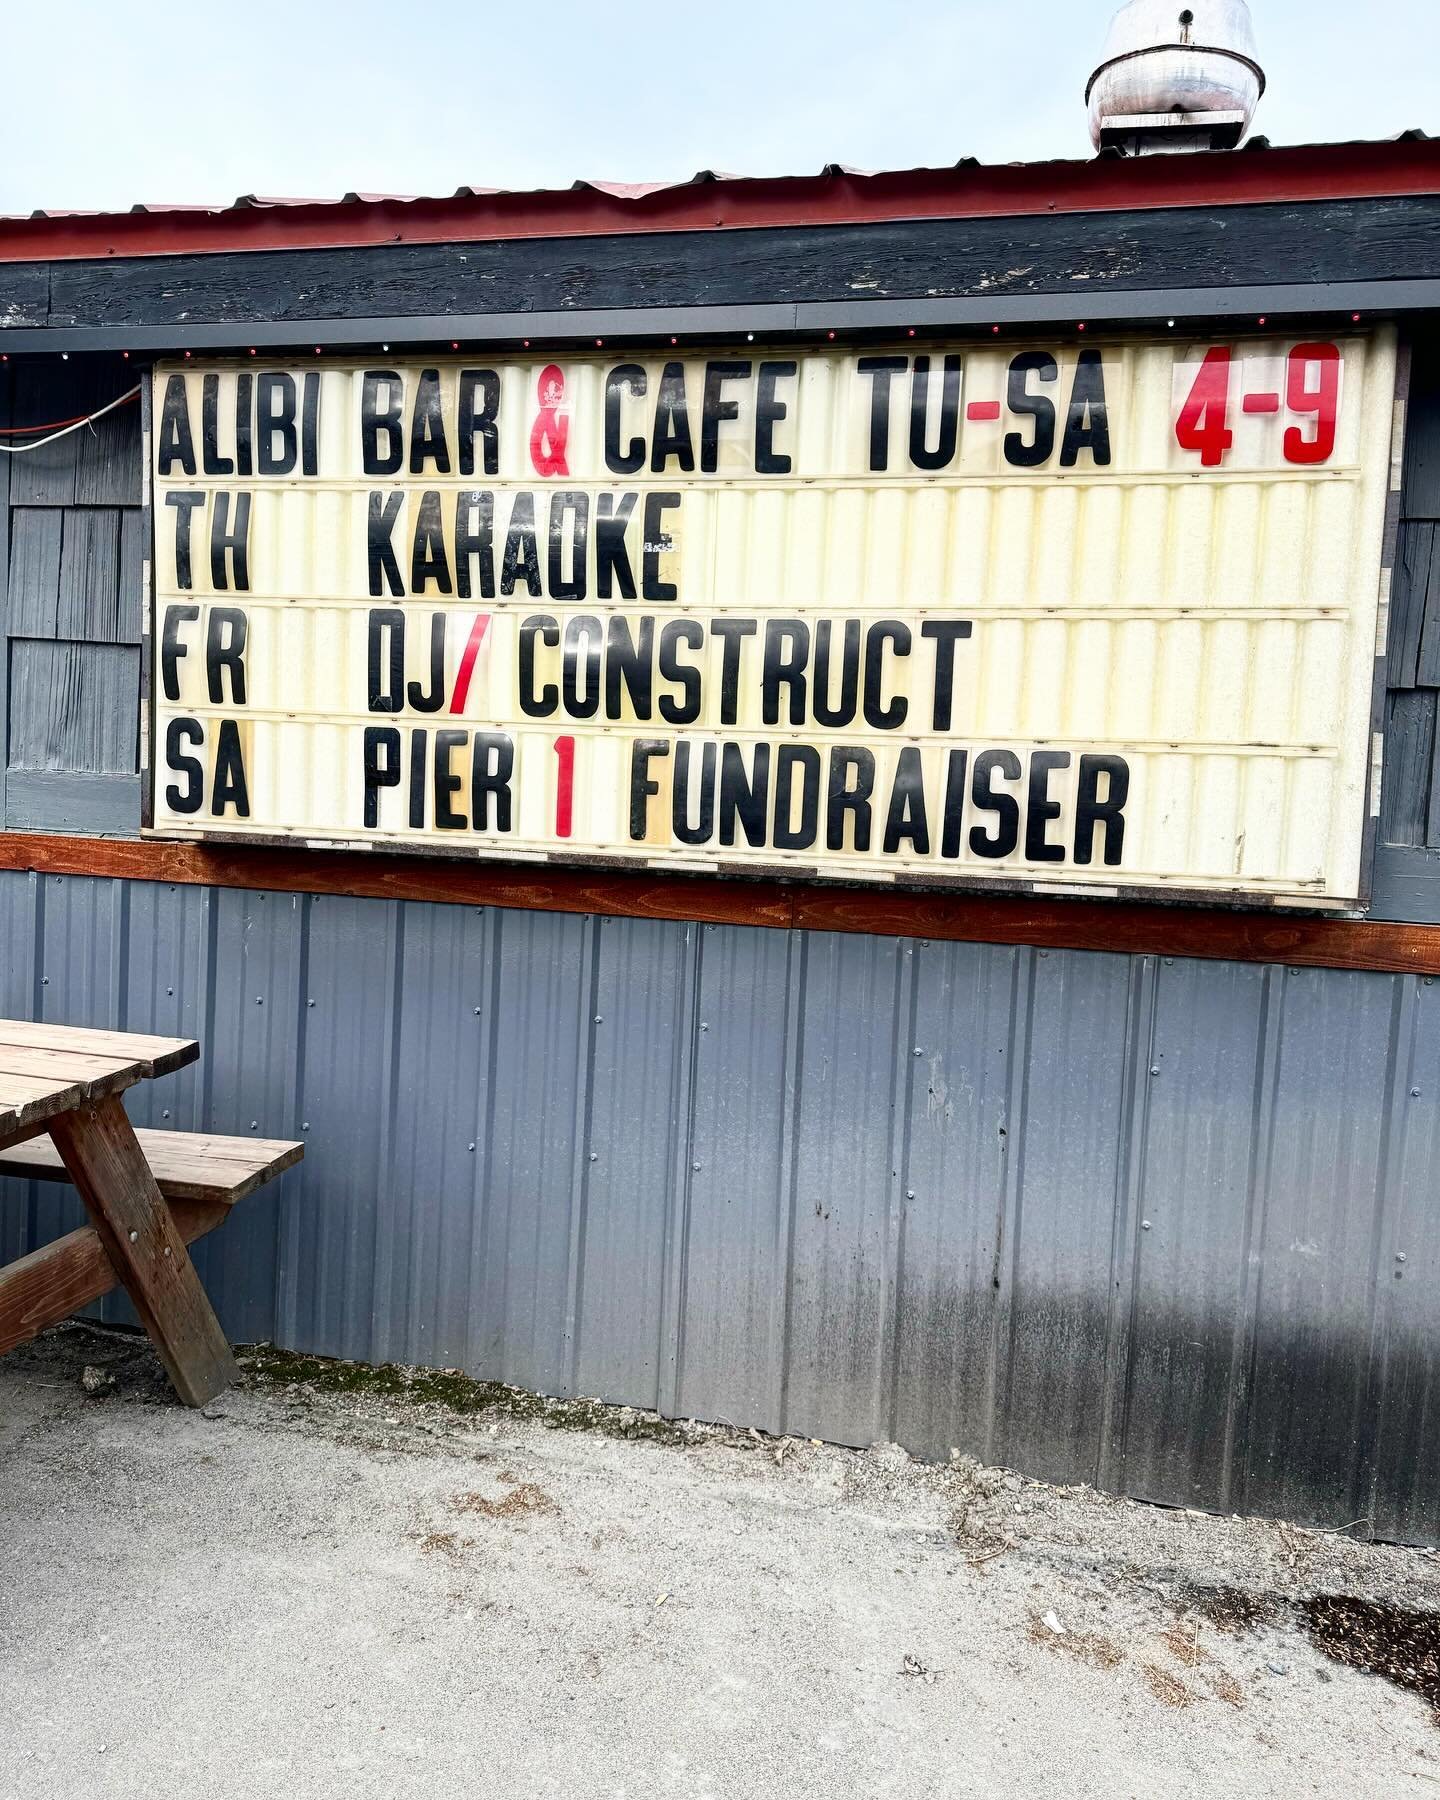 Join us at the Alibi this Saturday at 9:00 PM for a karaoke/dance party! A $10 suggested donation supports Pier One Theatre production costs and operating expenses. Come on down!